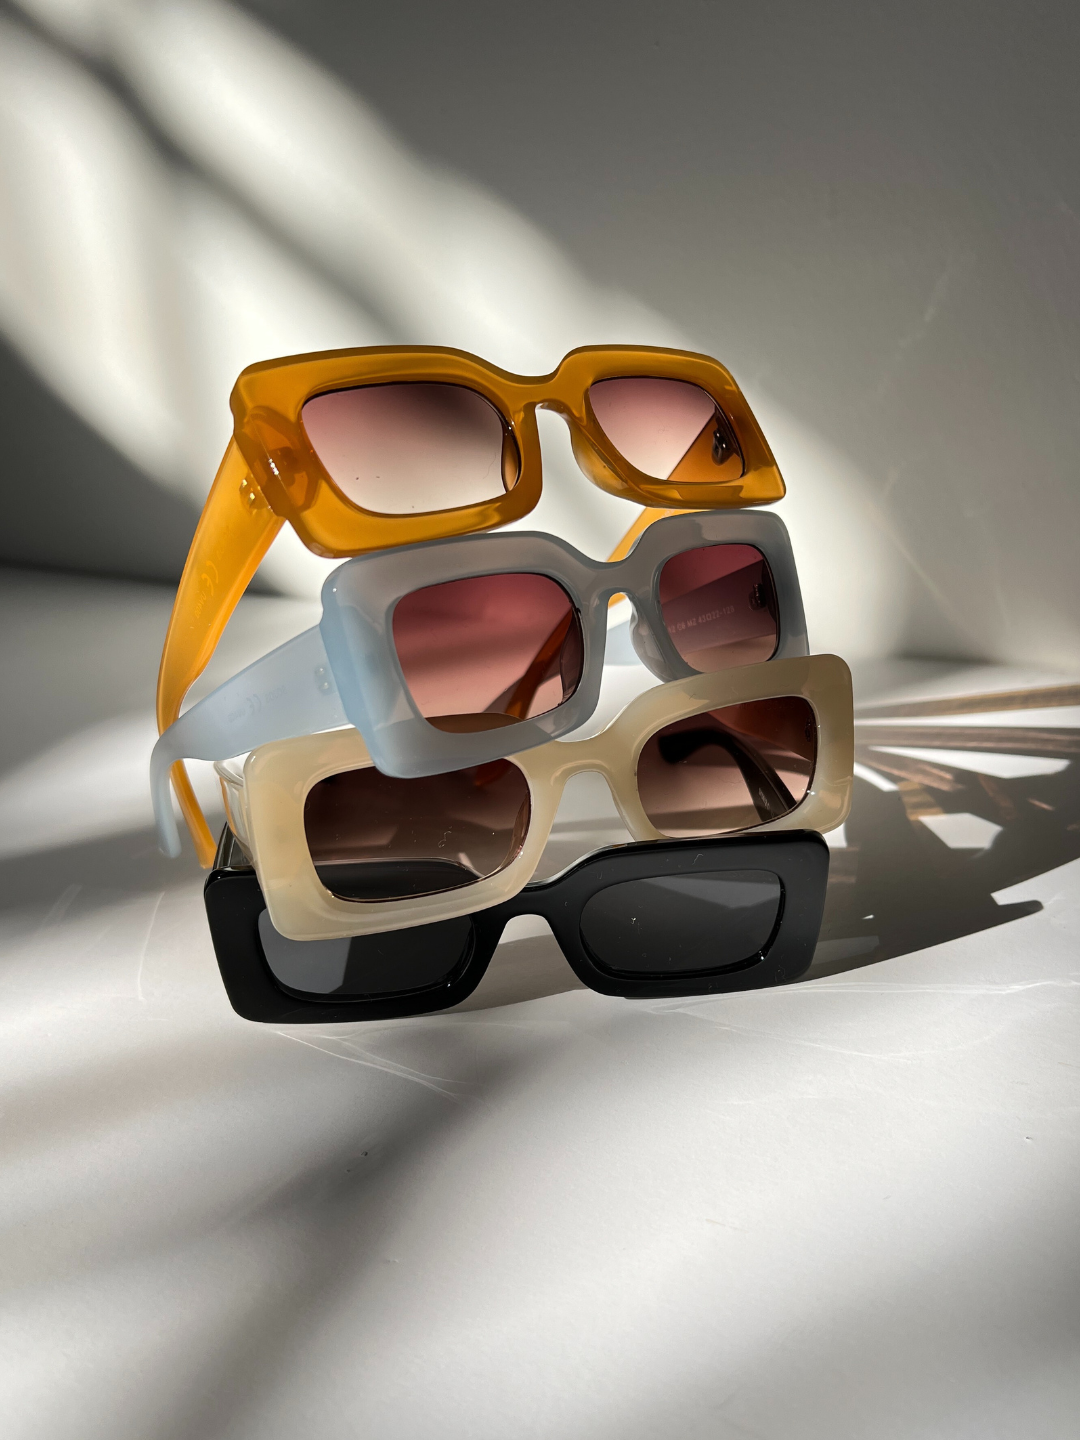 Group of kids rectangle sunglasses, stacked on top of each other, in orange, blue, orange, cream, and black, on a white background.